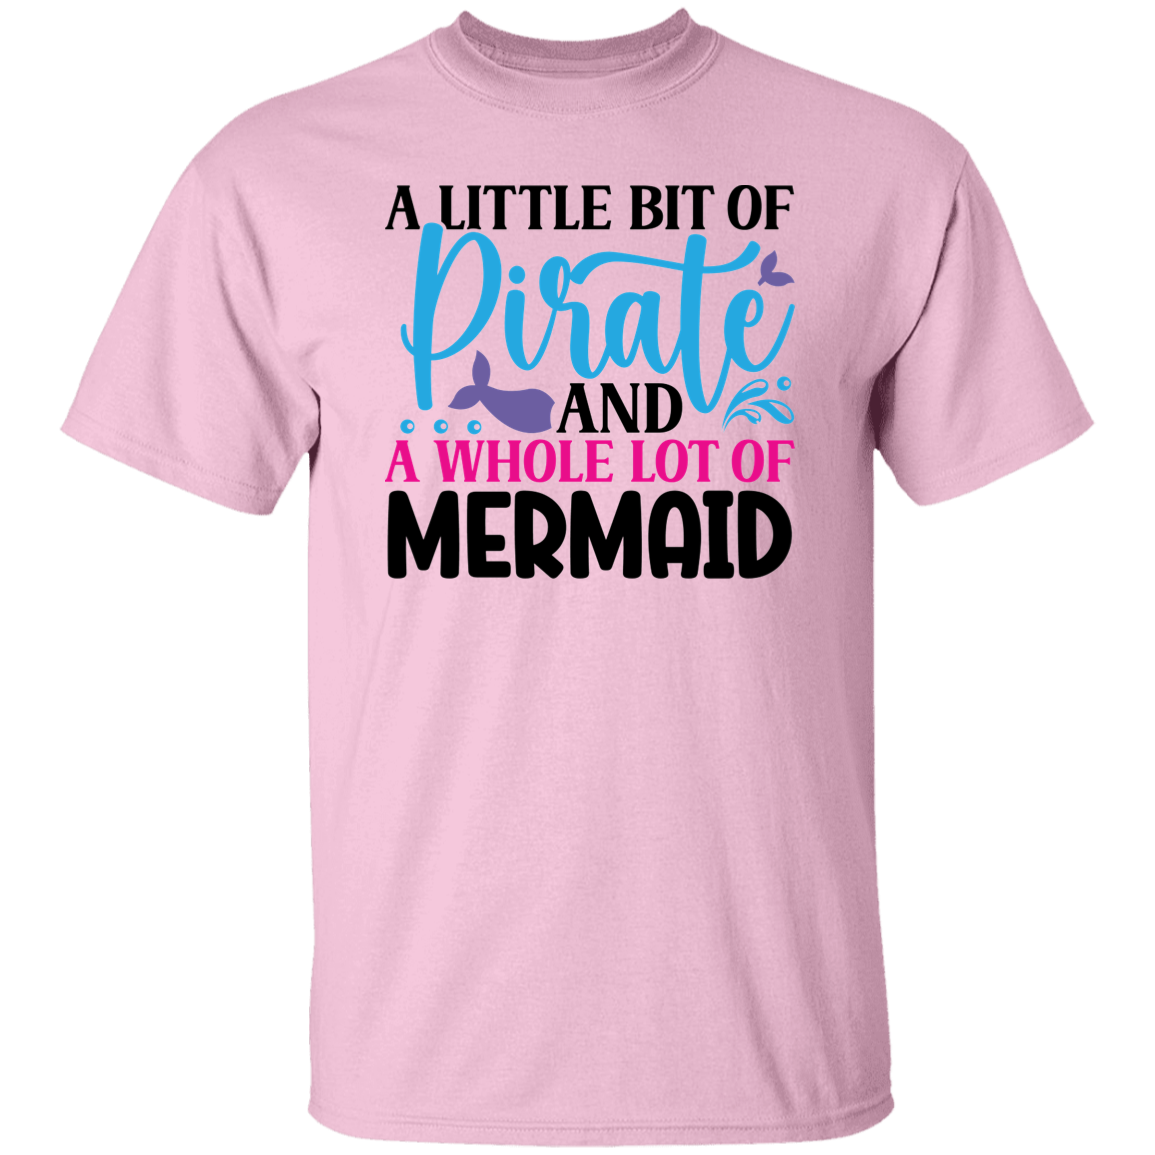 A Little Bit of Pirate and A Whole Lot of Mermaid G500 5.3 oz. T-Shirt